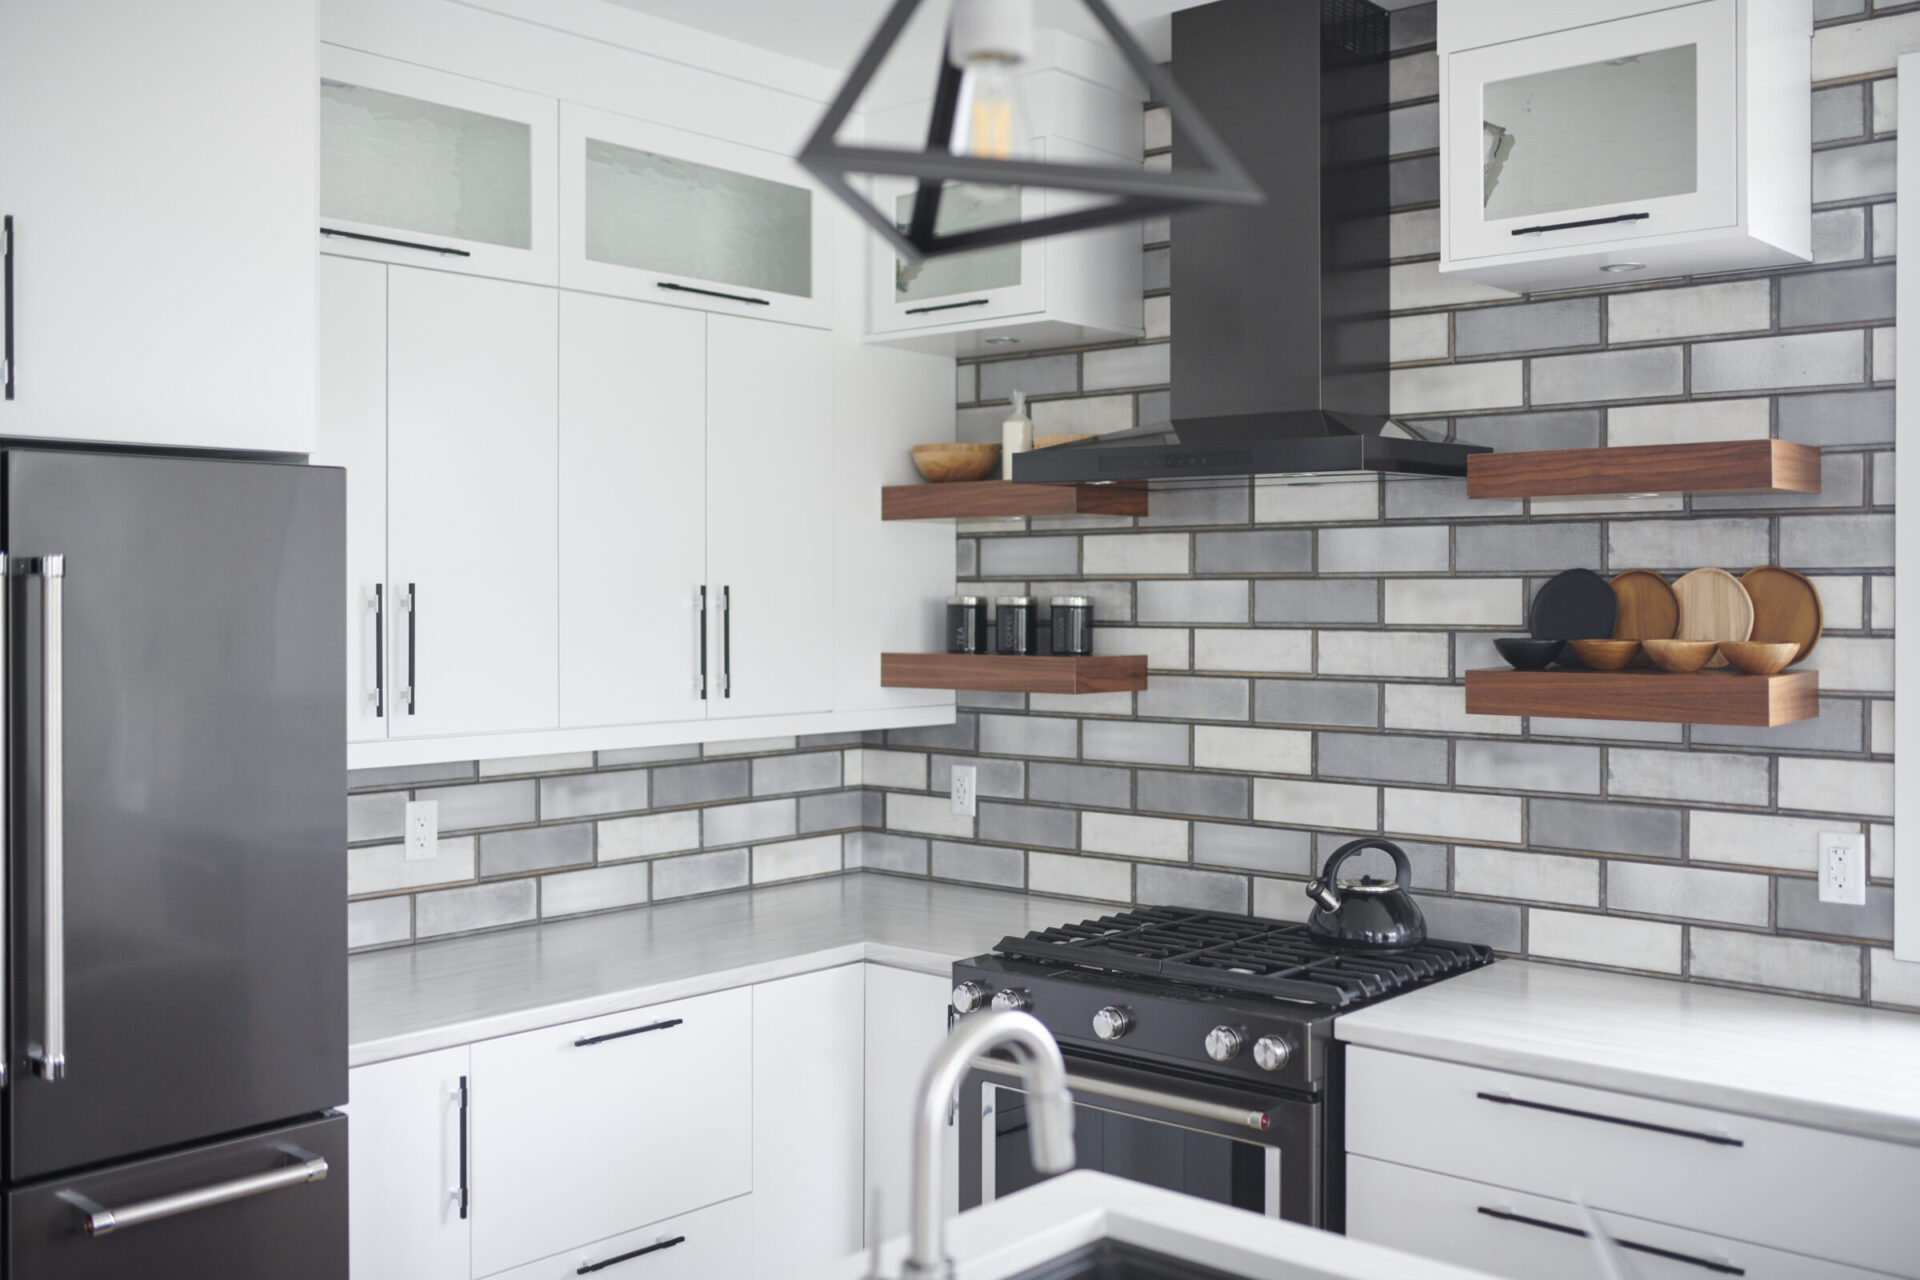 Modern kitchen interior with stainless steel appliances, white cabinets, gray subway tile backsplash, wooden shelves, and a geometric light fixture.